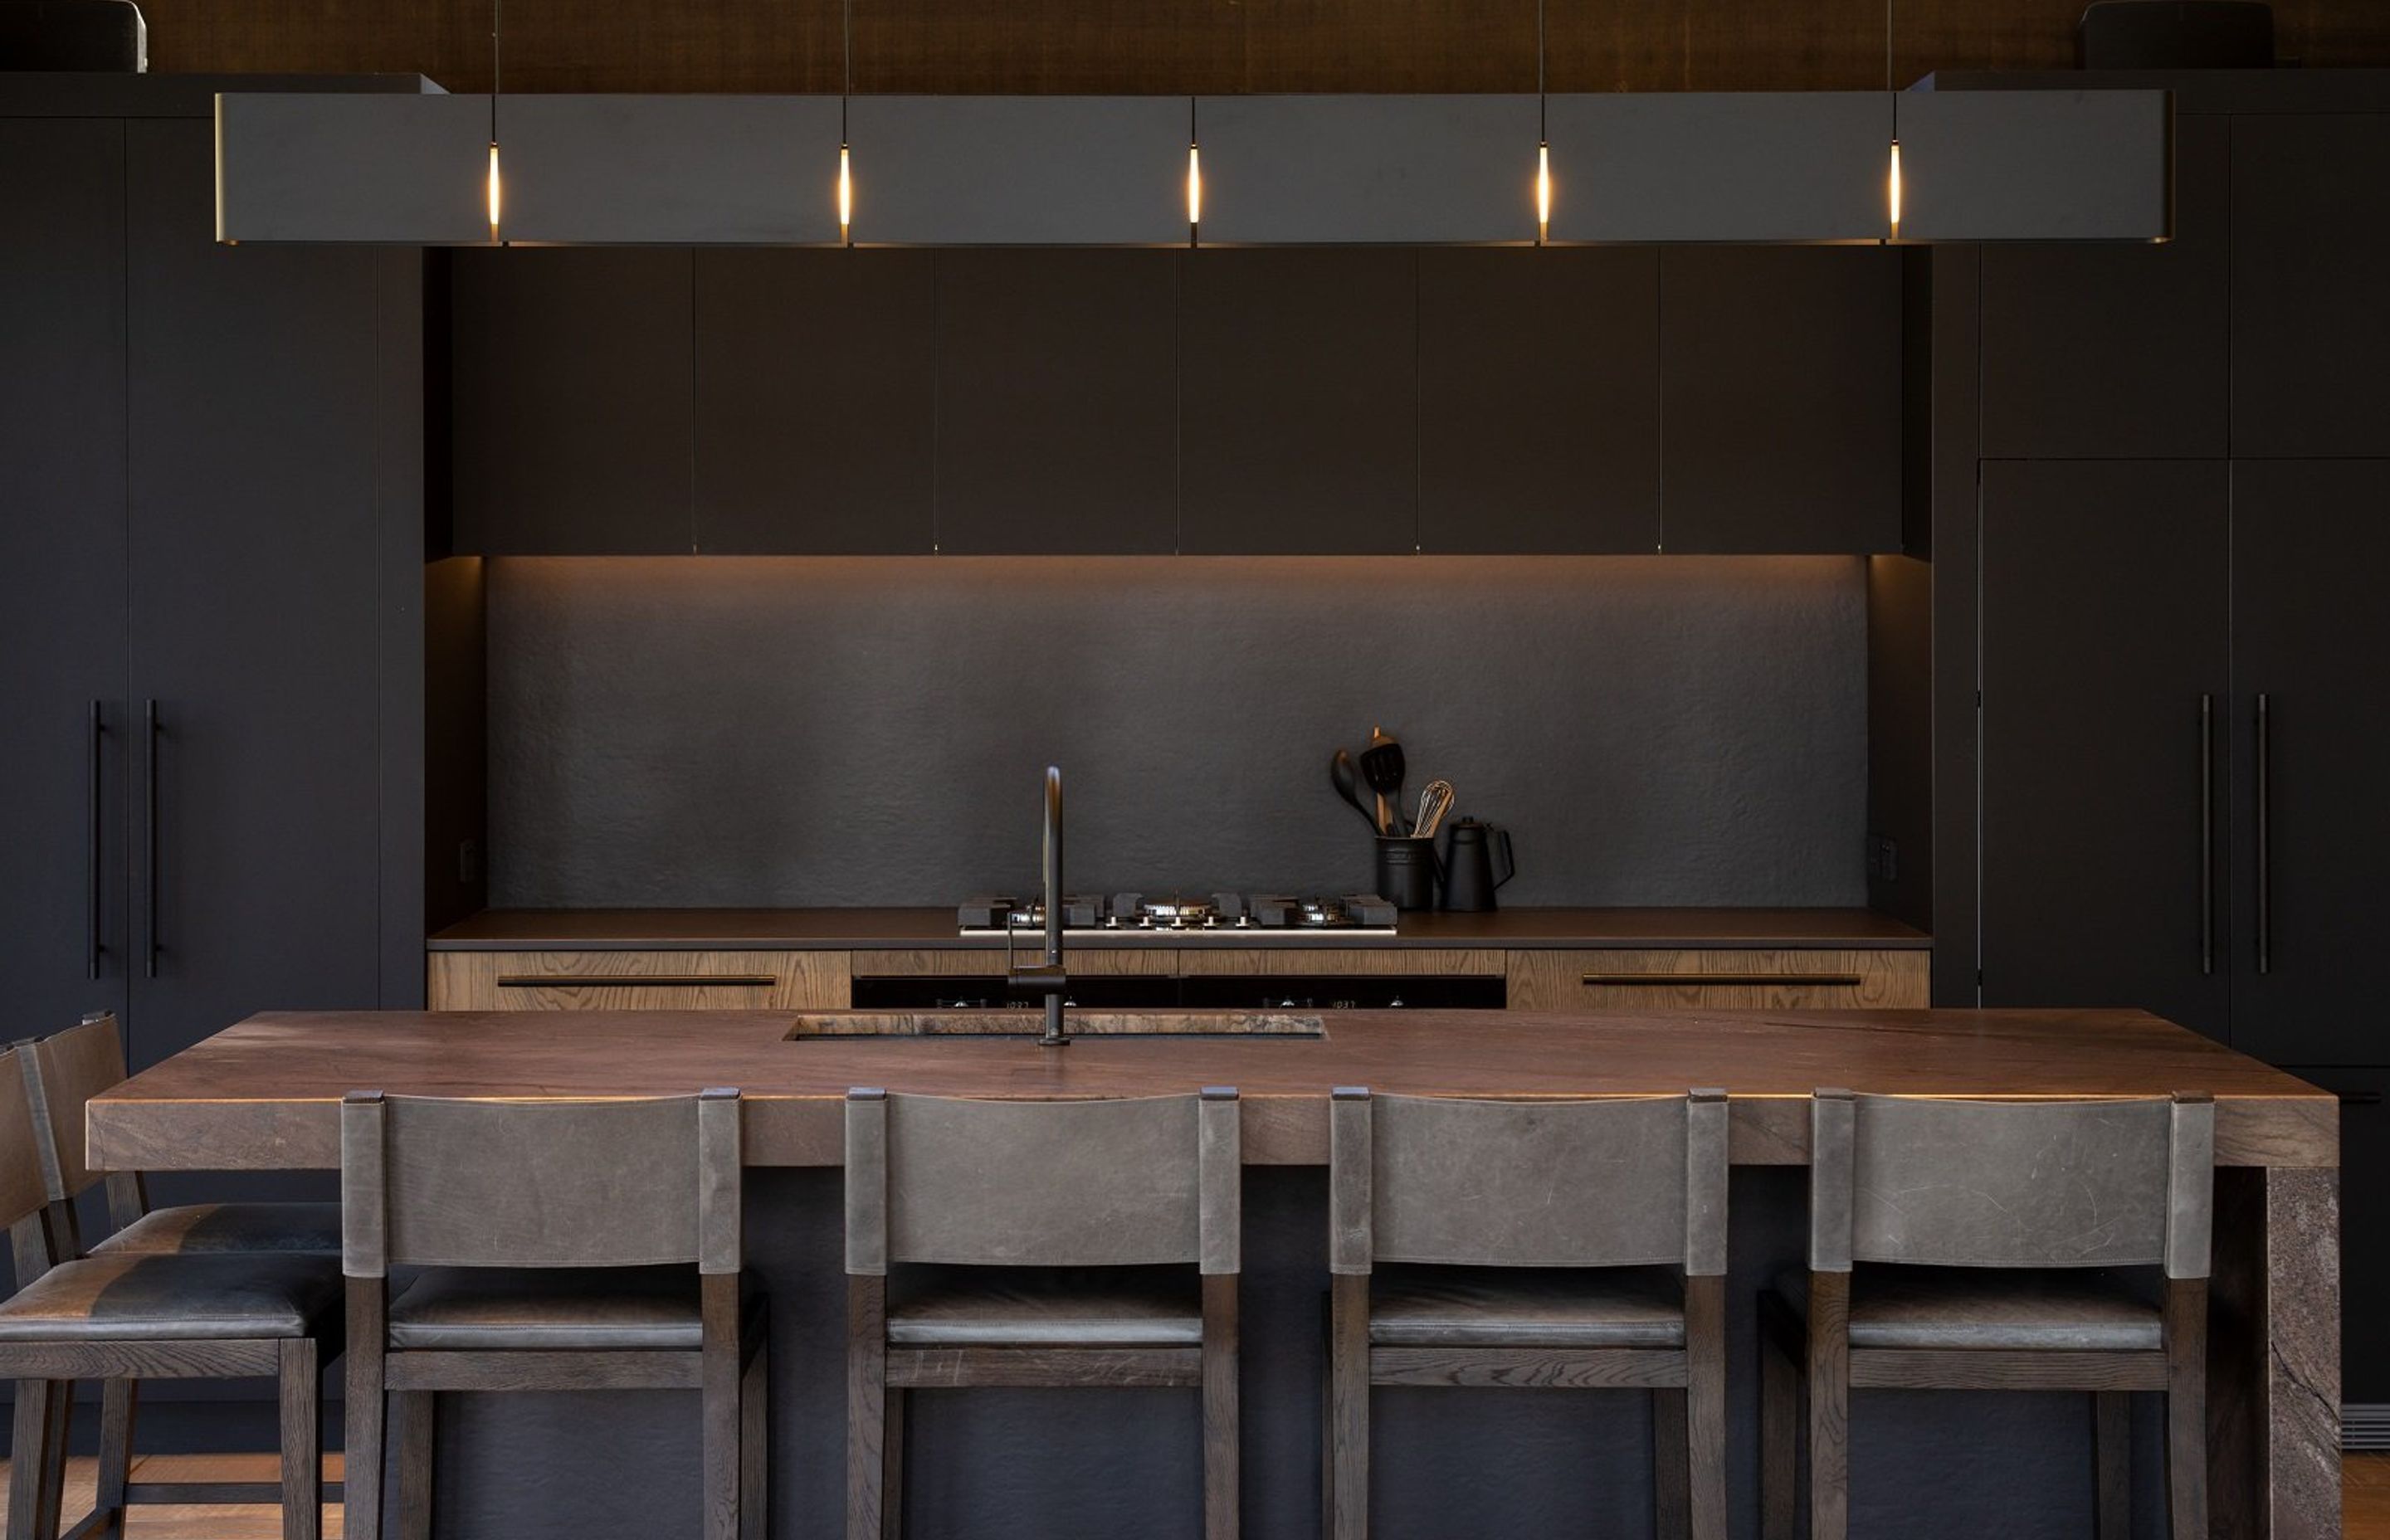 The dark palette was chosen for the kitchen, to give it an earthy and solid 'lodge' feel.